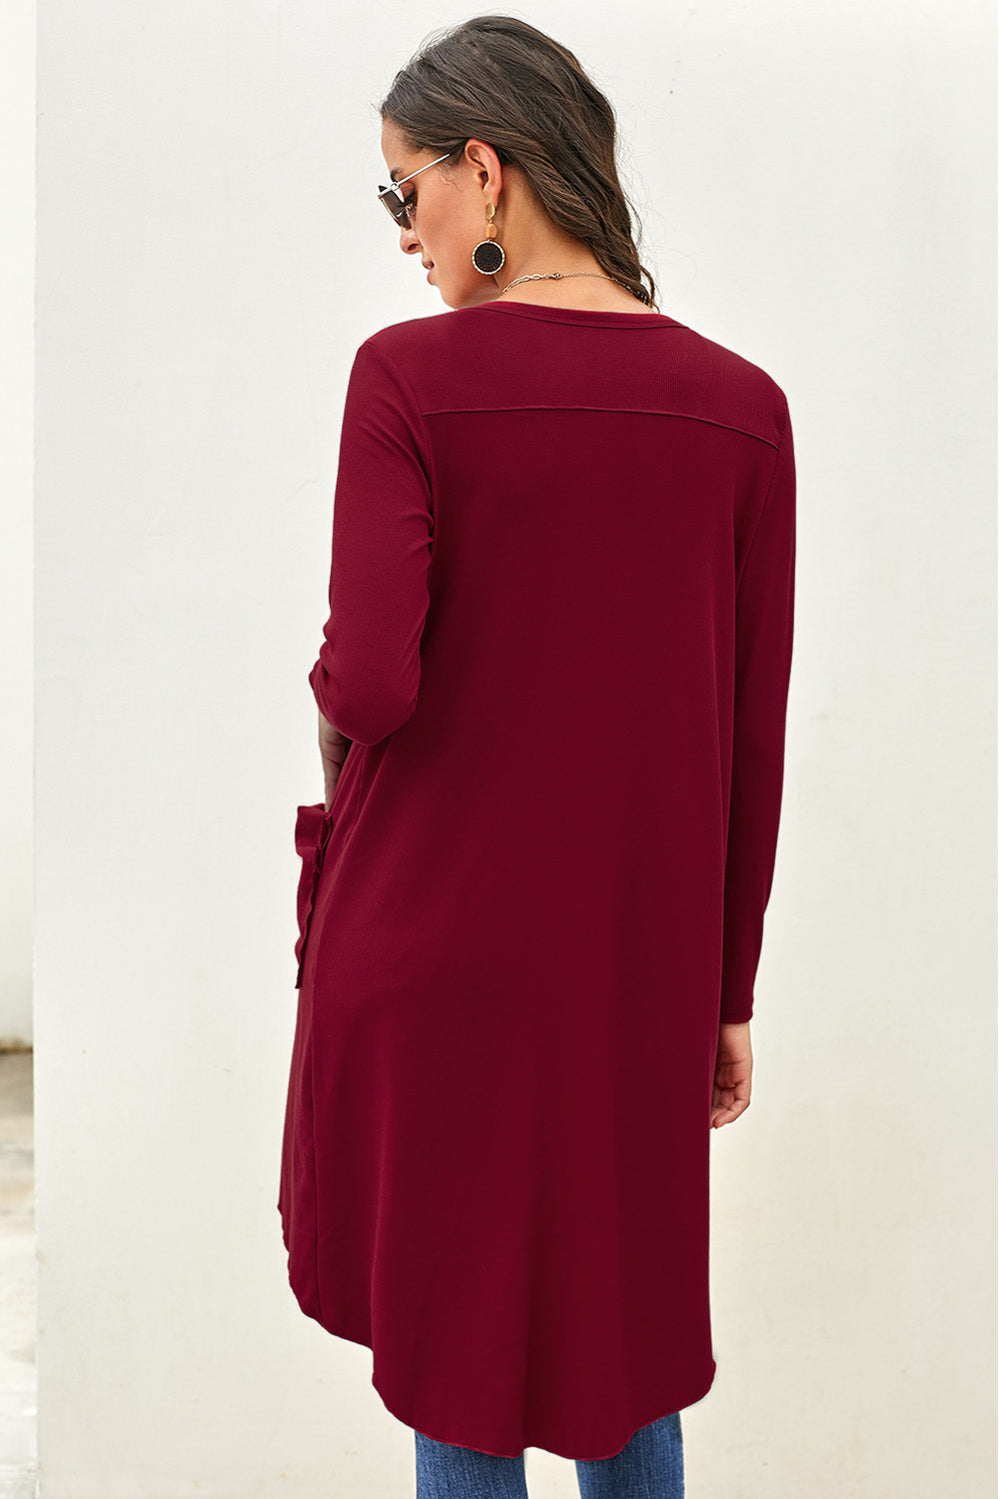 Burgundy Selected Button Down Pocketed Knit High Low Long Cardigan